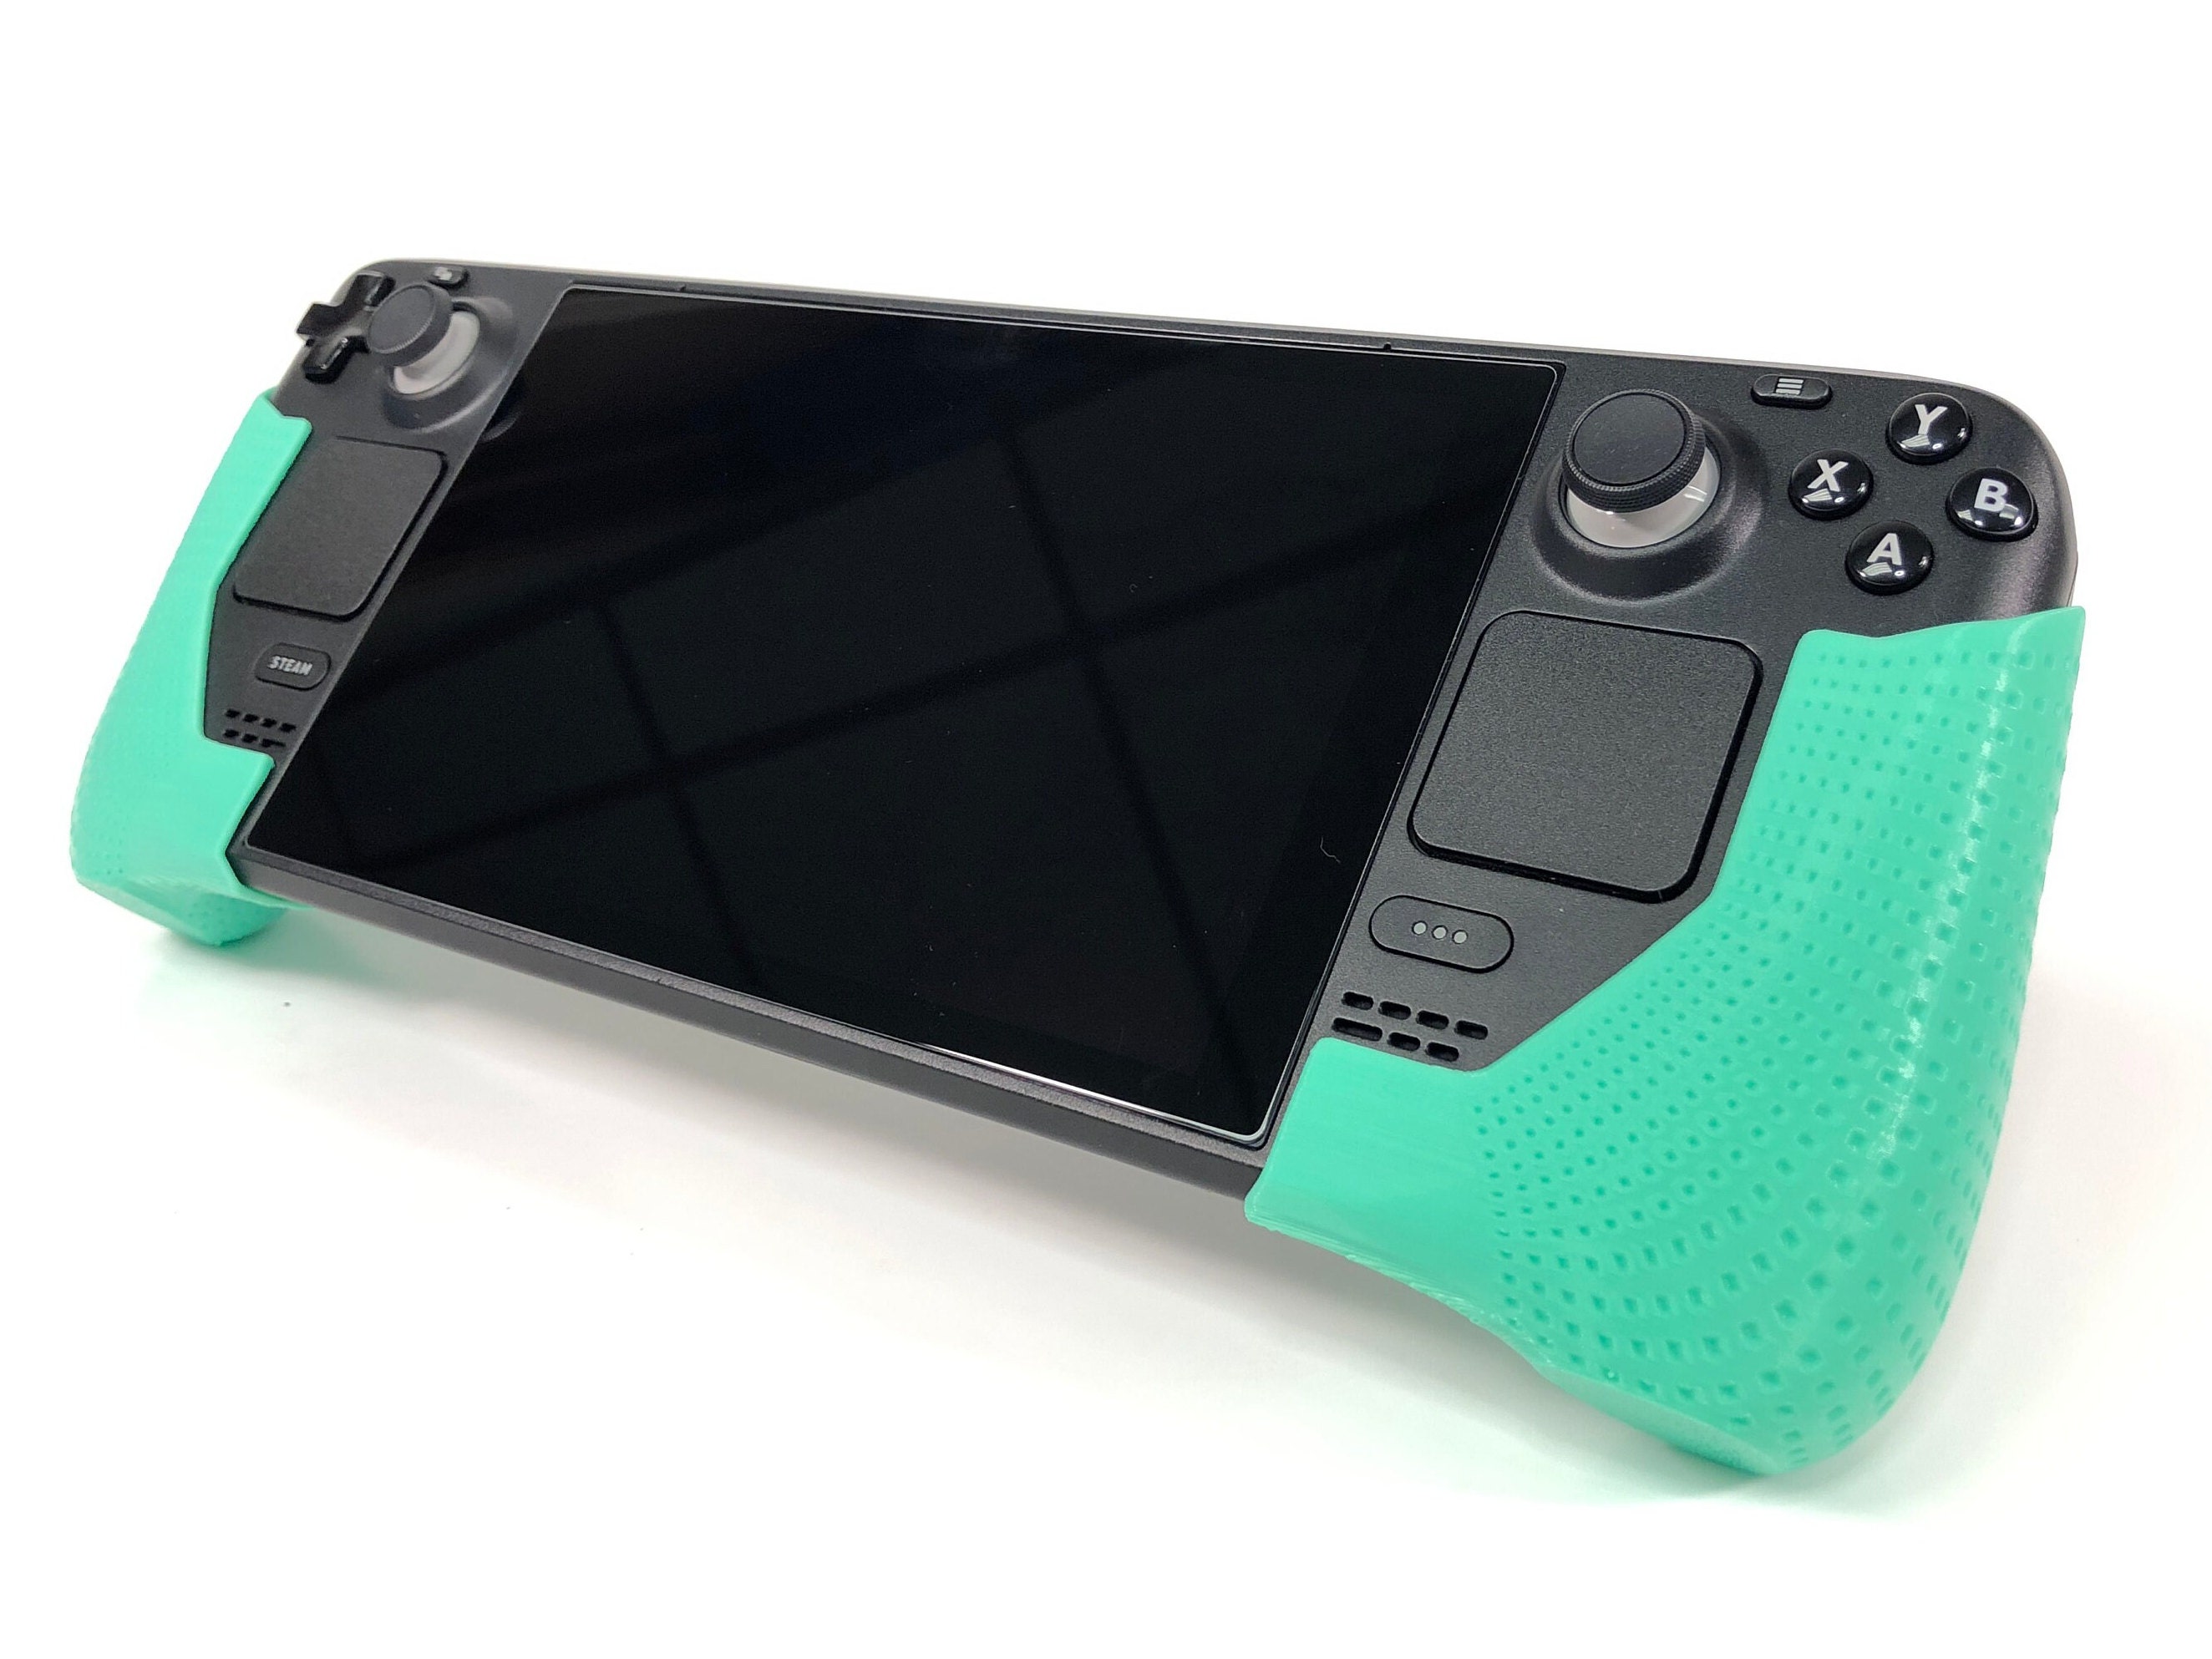 Looks like Skull&co are developing cases/accessories for the Ally! Their  switch cases and grips are excellent : r/ROGAlly